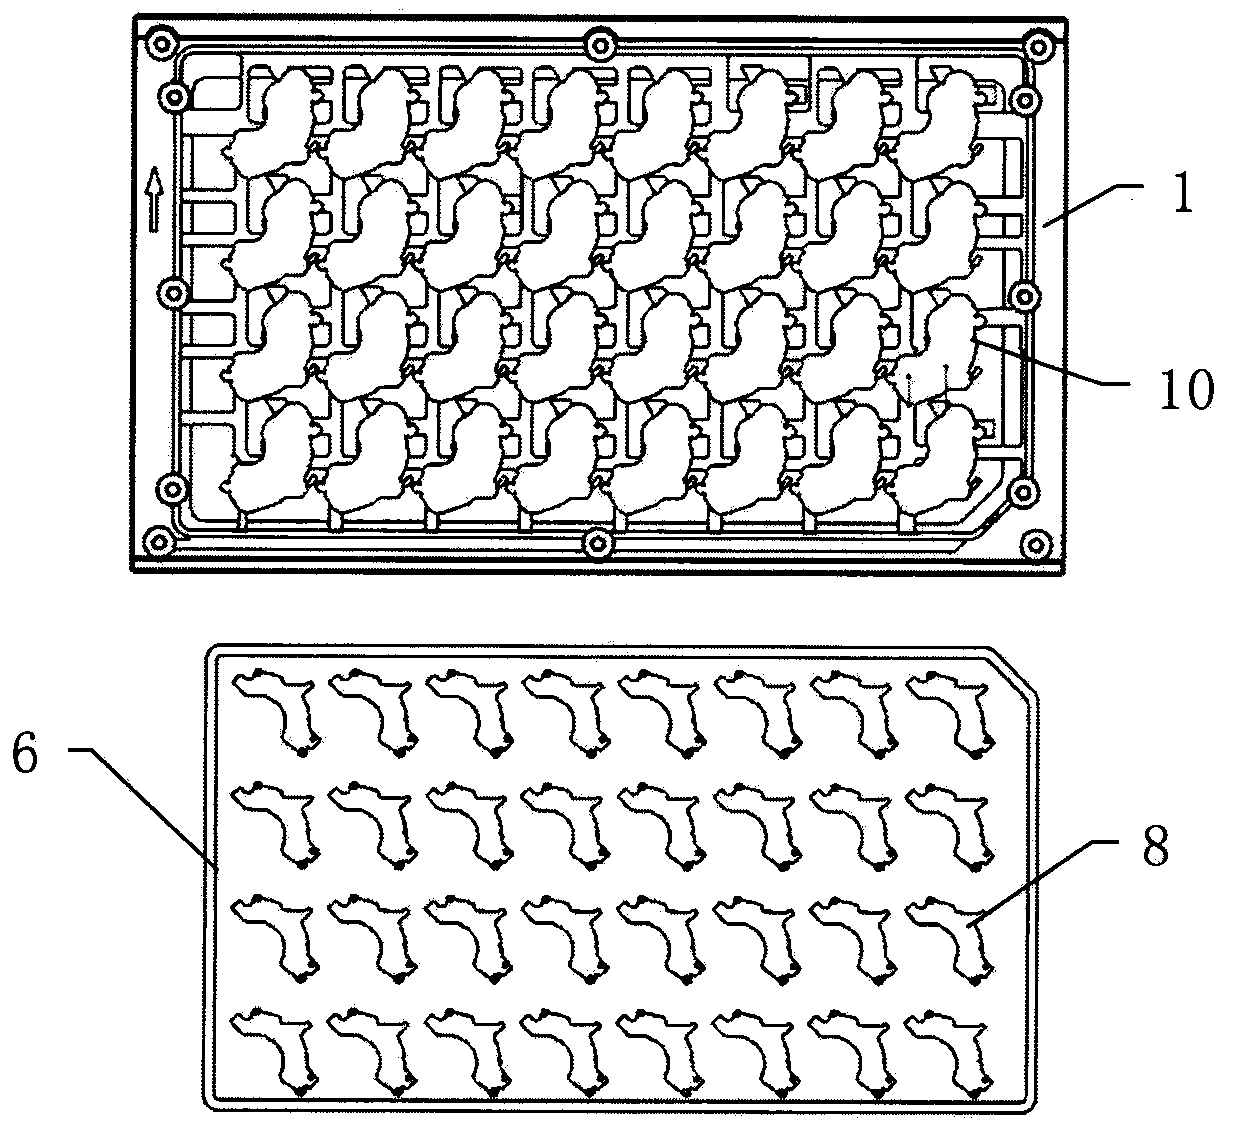 Method and equipment for detecting batched products